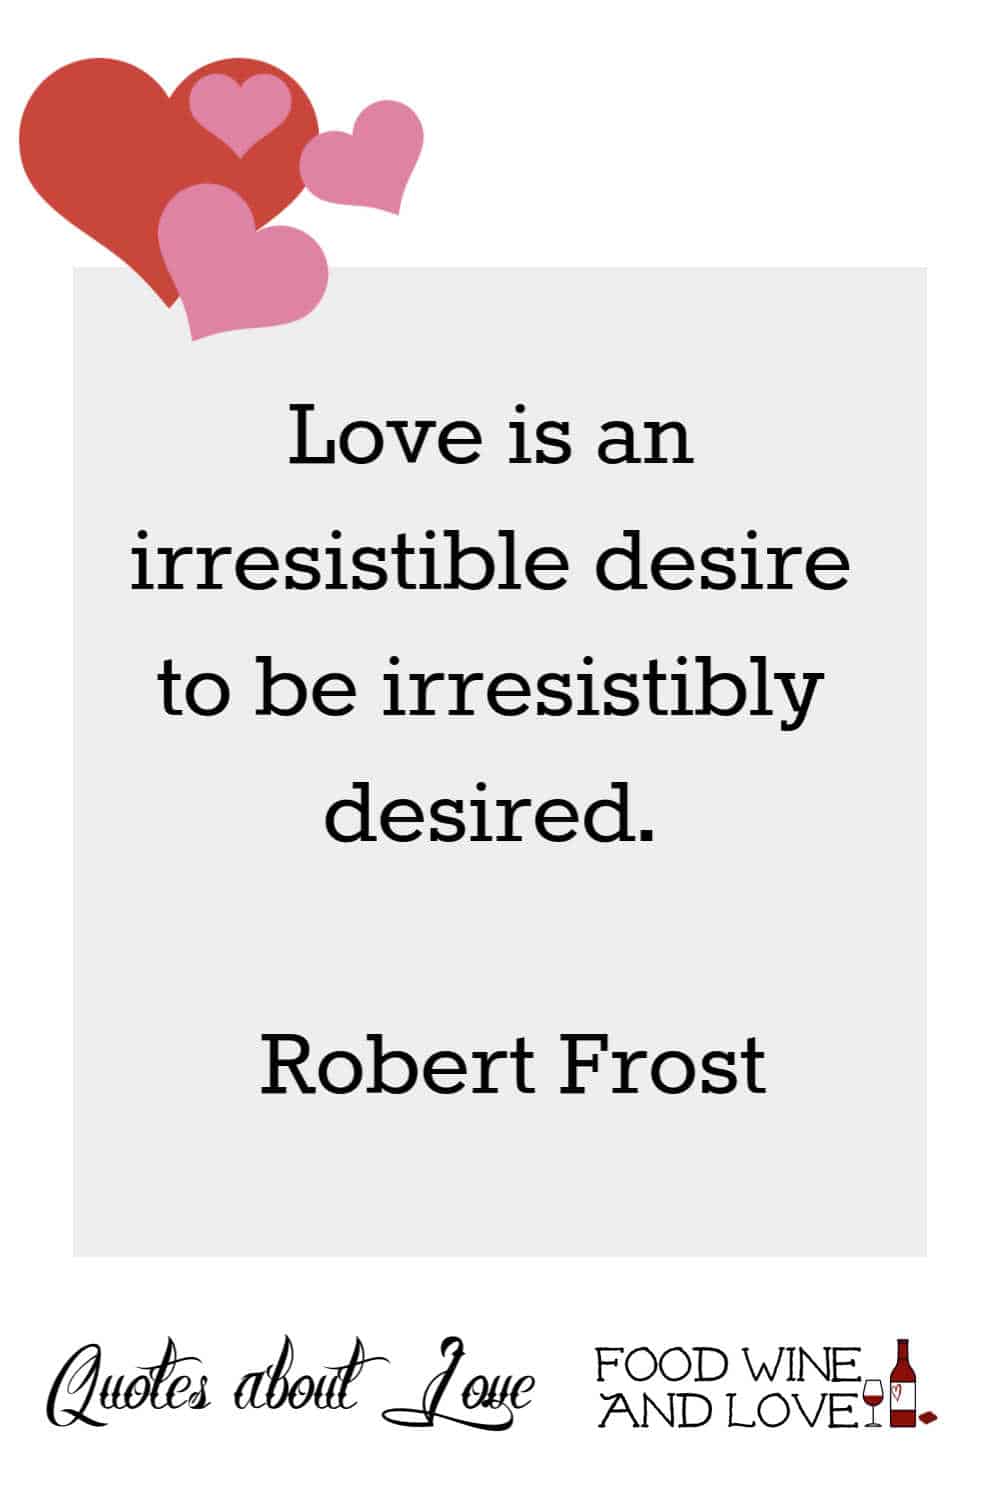 Love is an irresistible desire to be irresistibly desired.”   Robert Frost